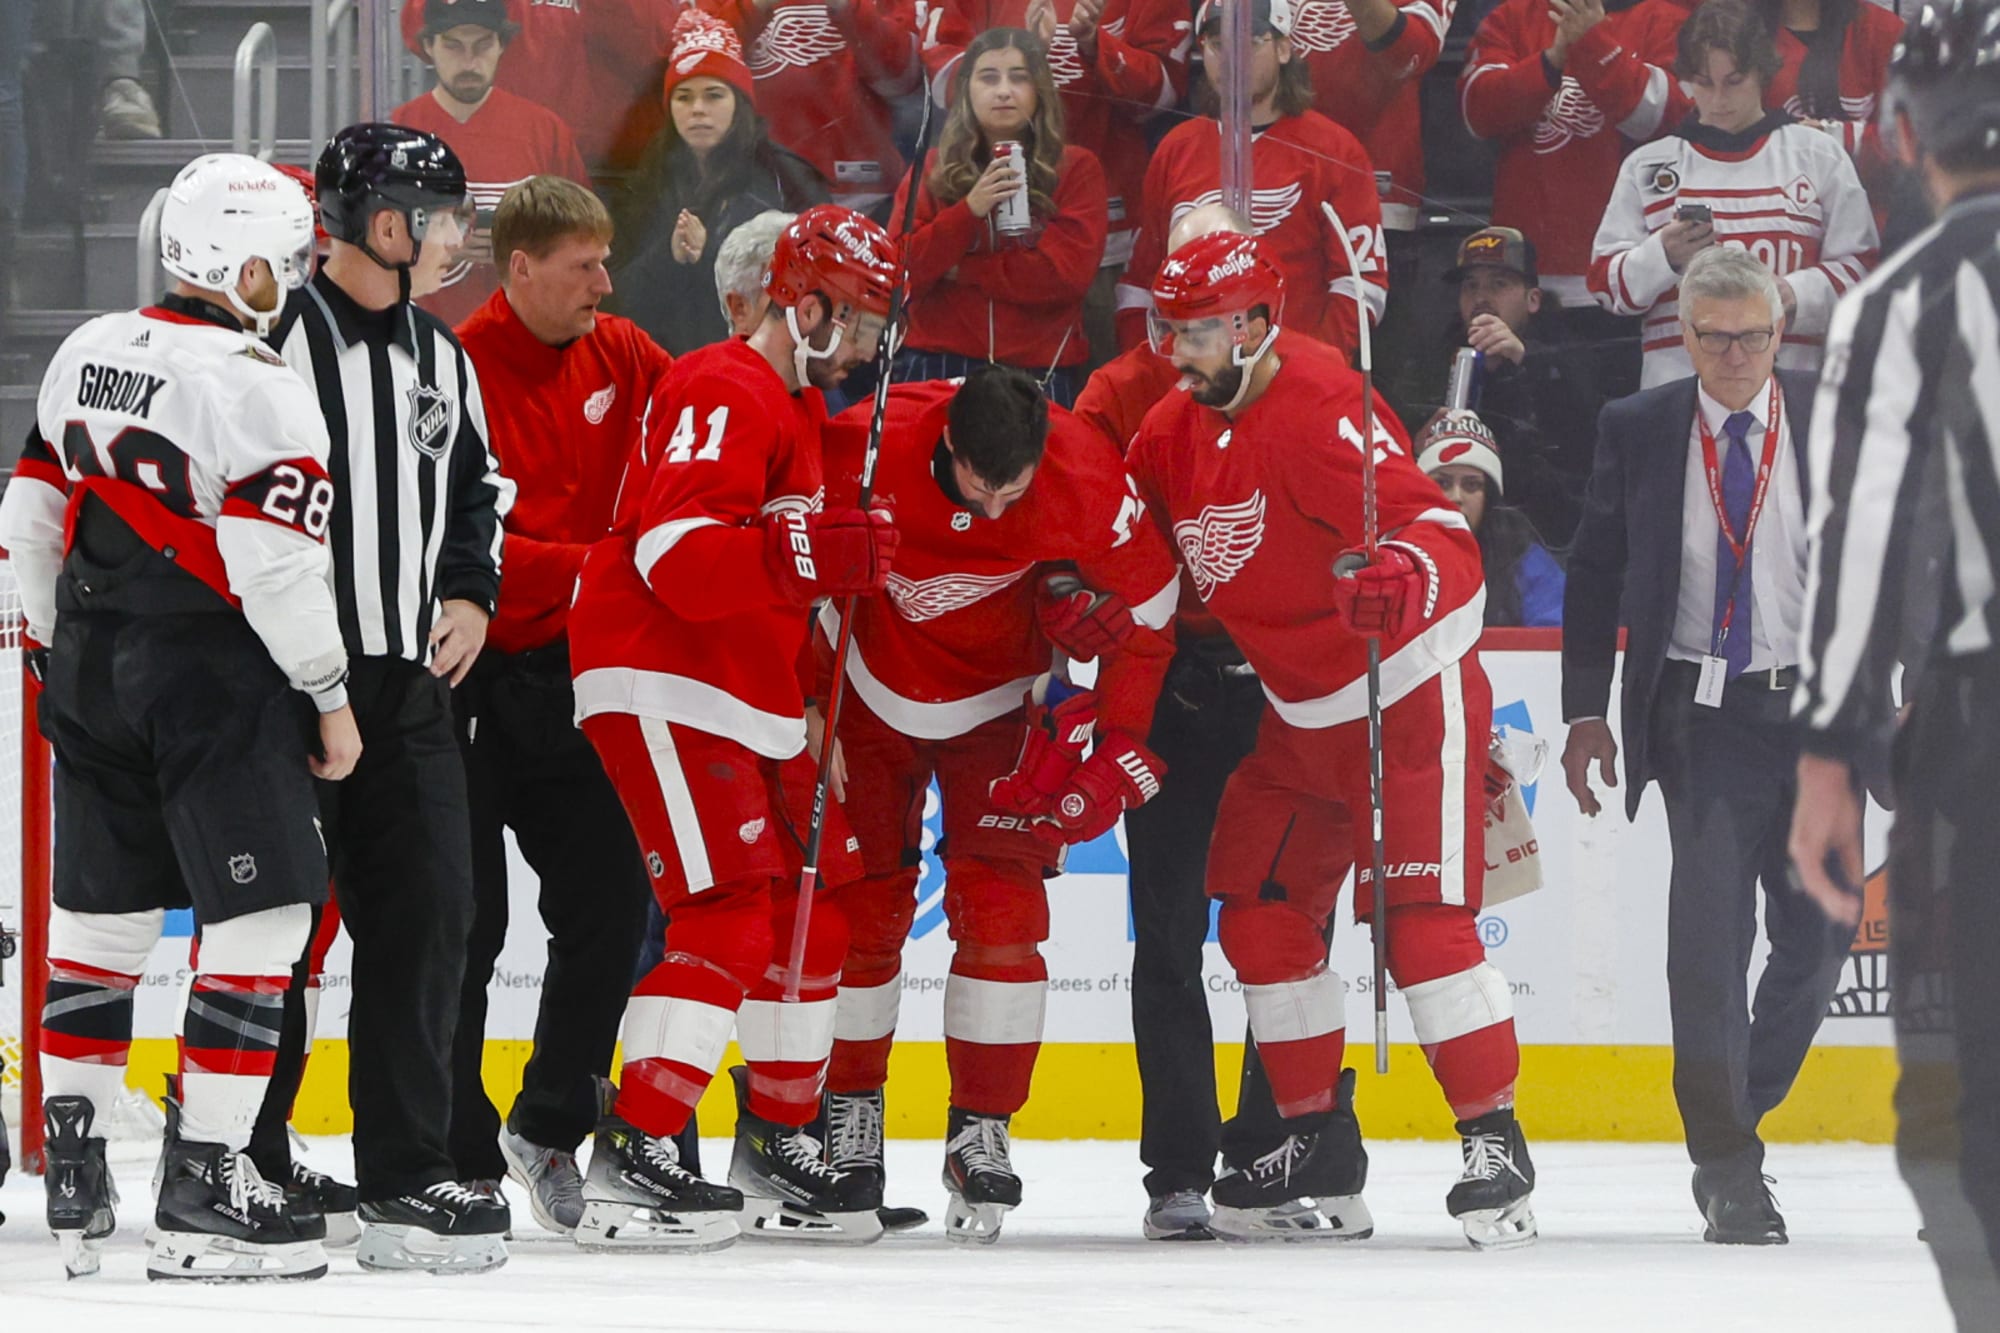 Red Wings' Larkin knocked unconscious after cross-check from behind